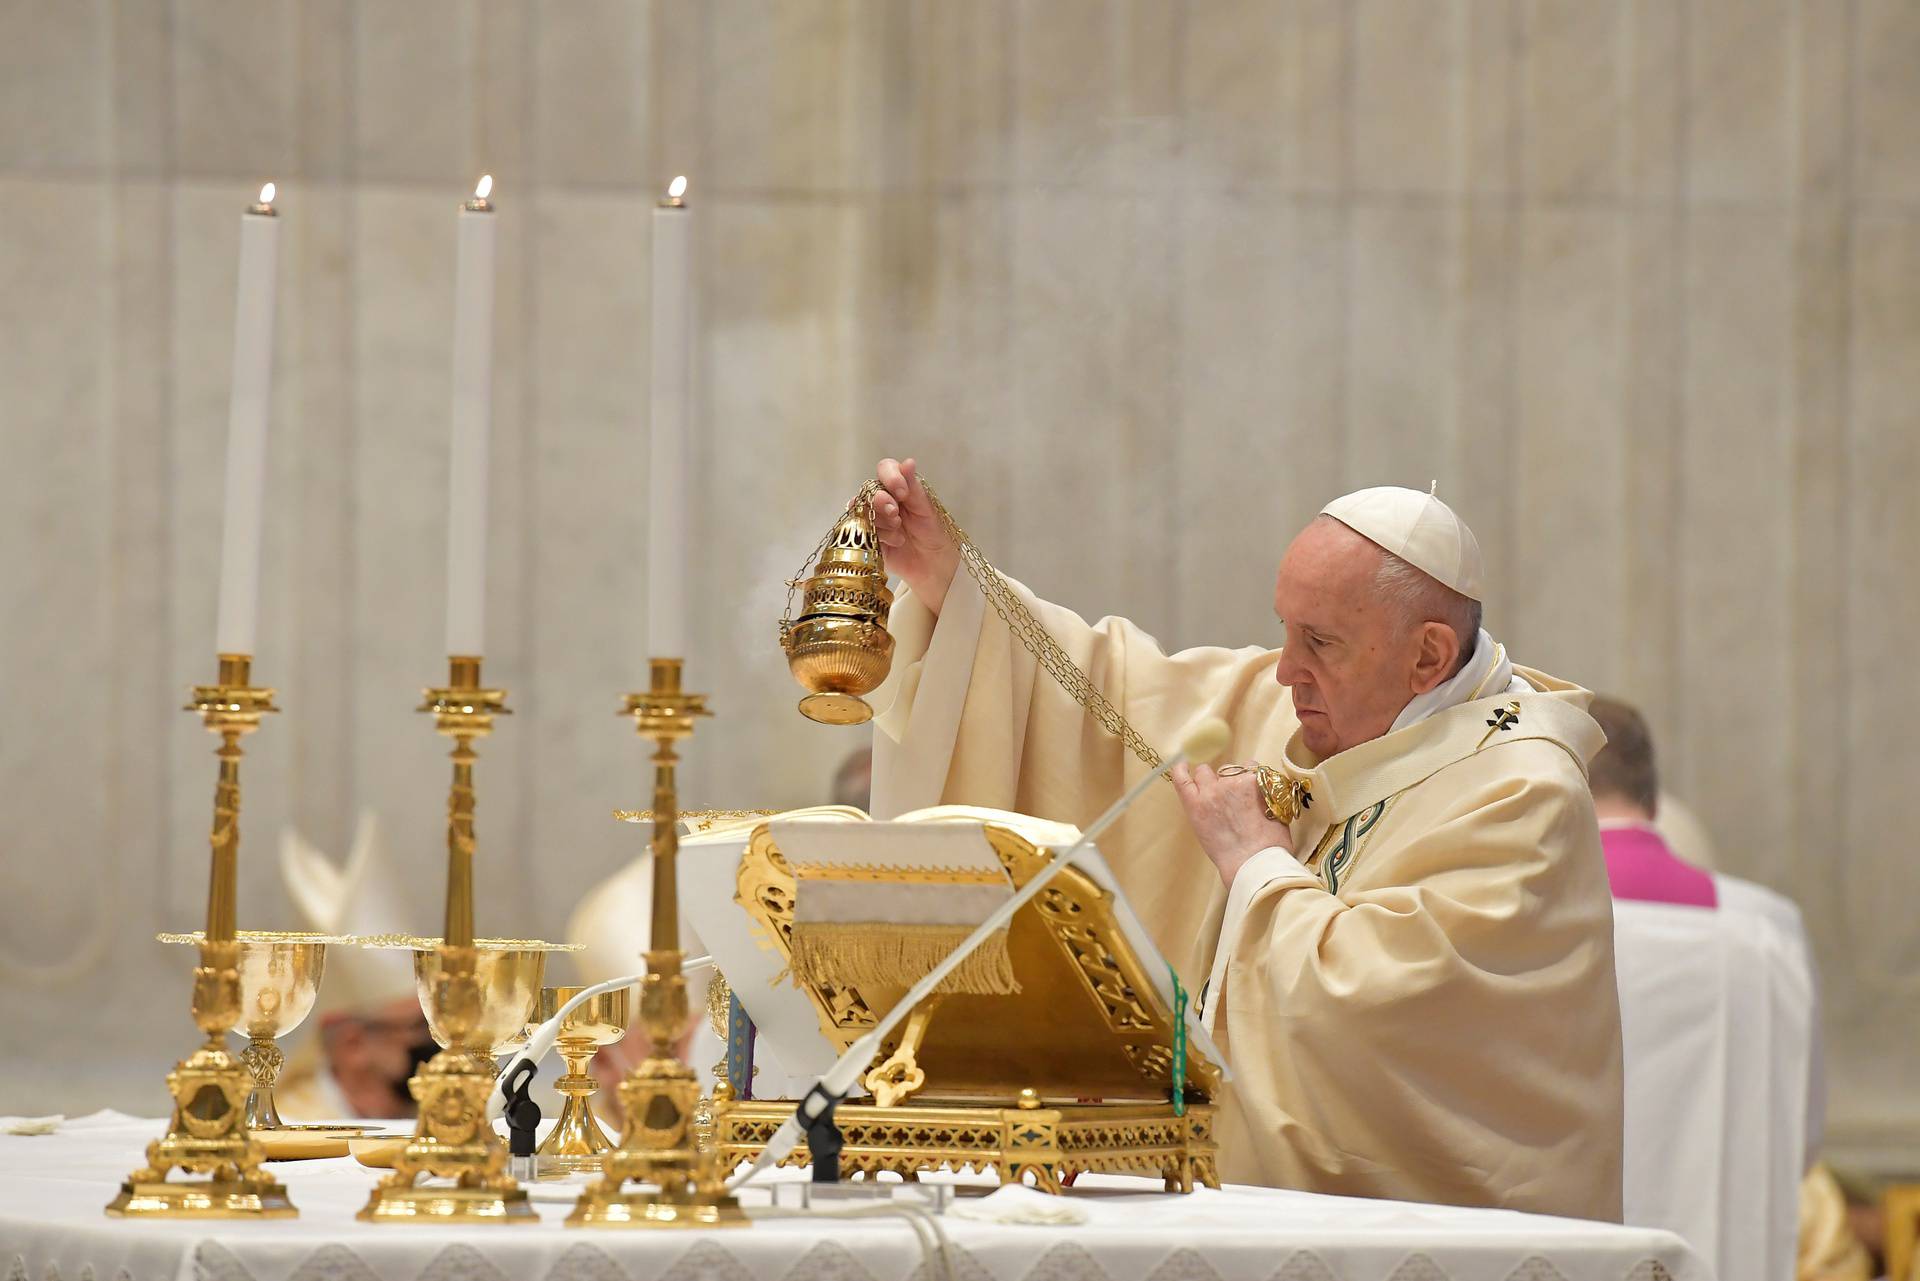 Pope Francis celebrates the Eucharist during Easter Sunday Mass at St. Peter's Basilica at the Vatican